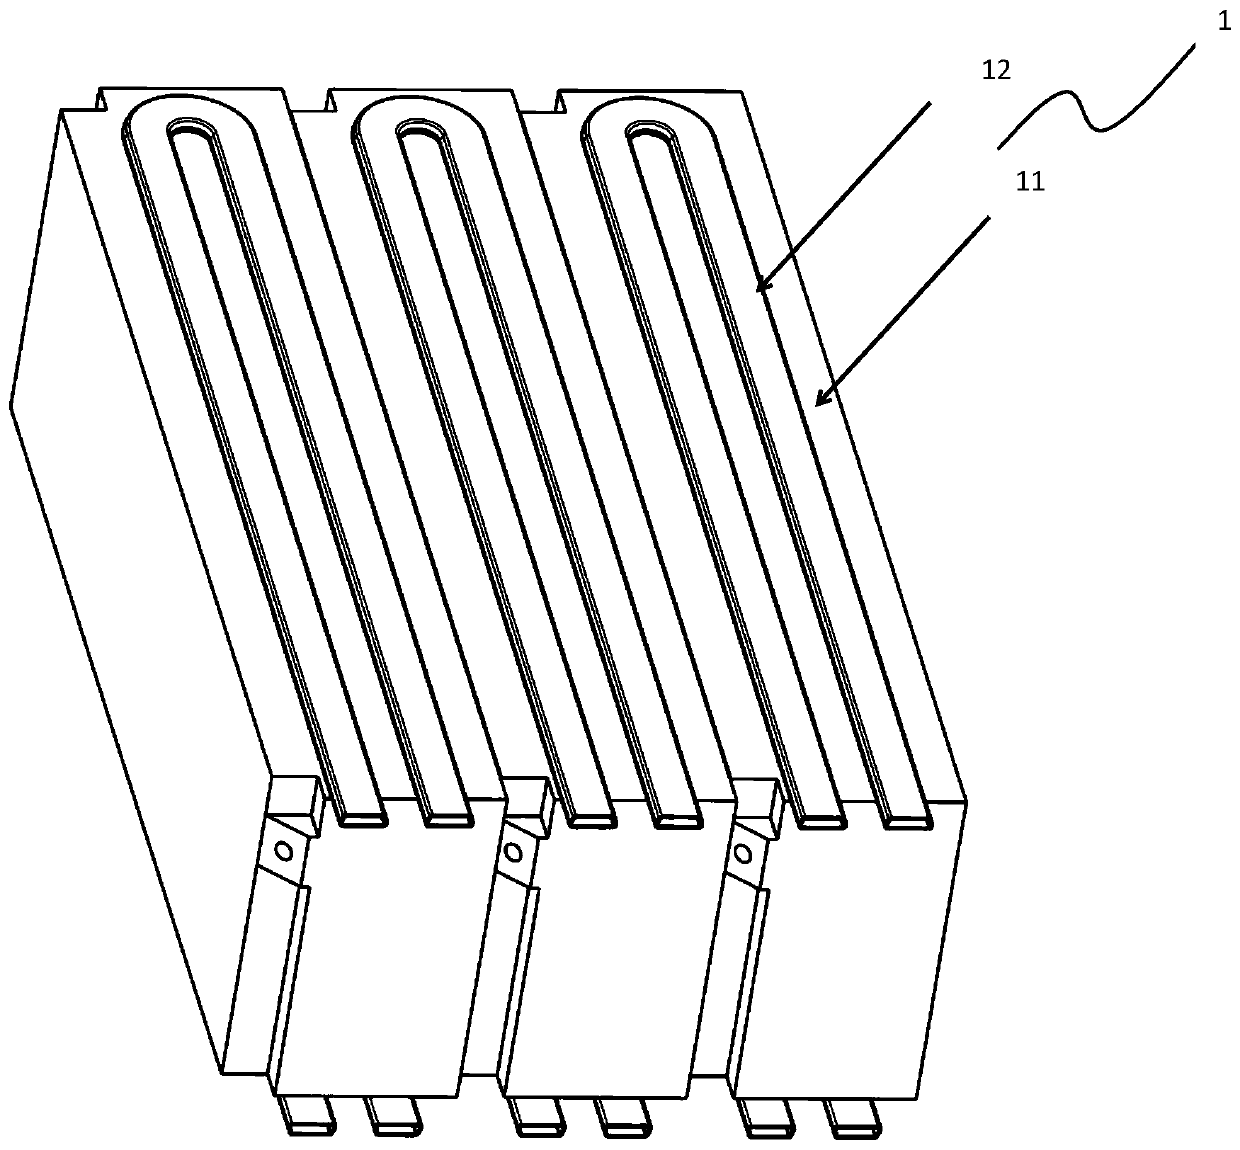 Battery pack cooling system and vehicle